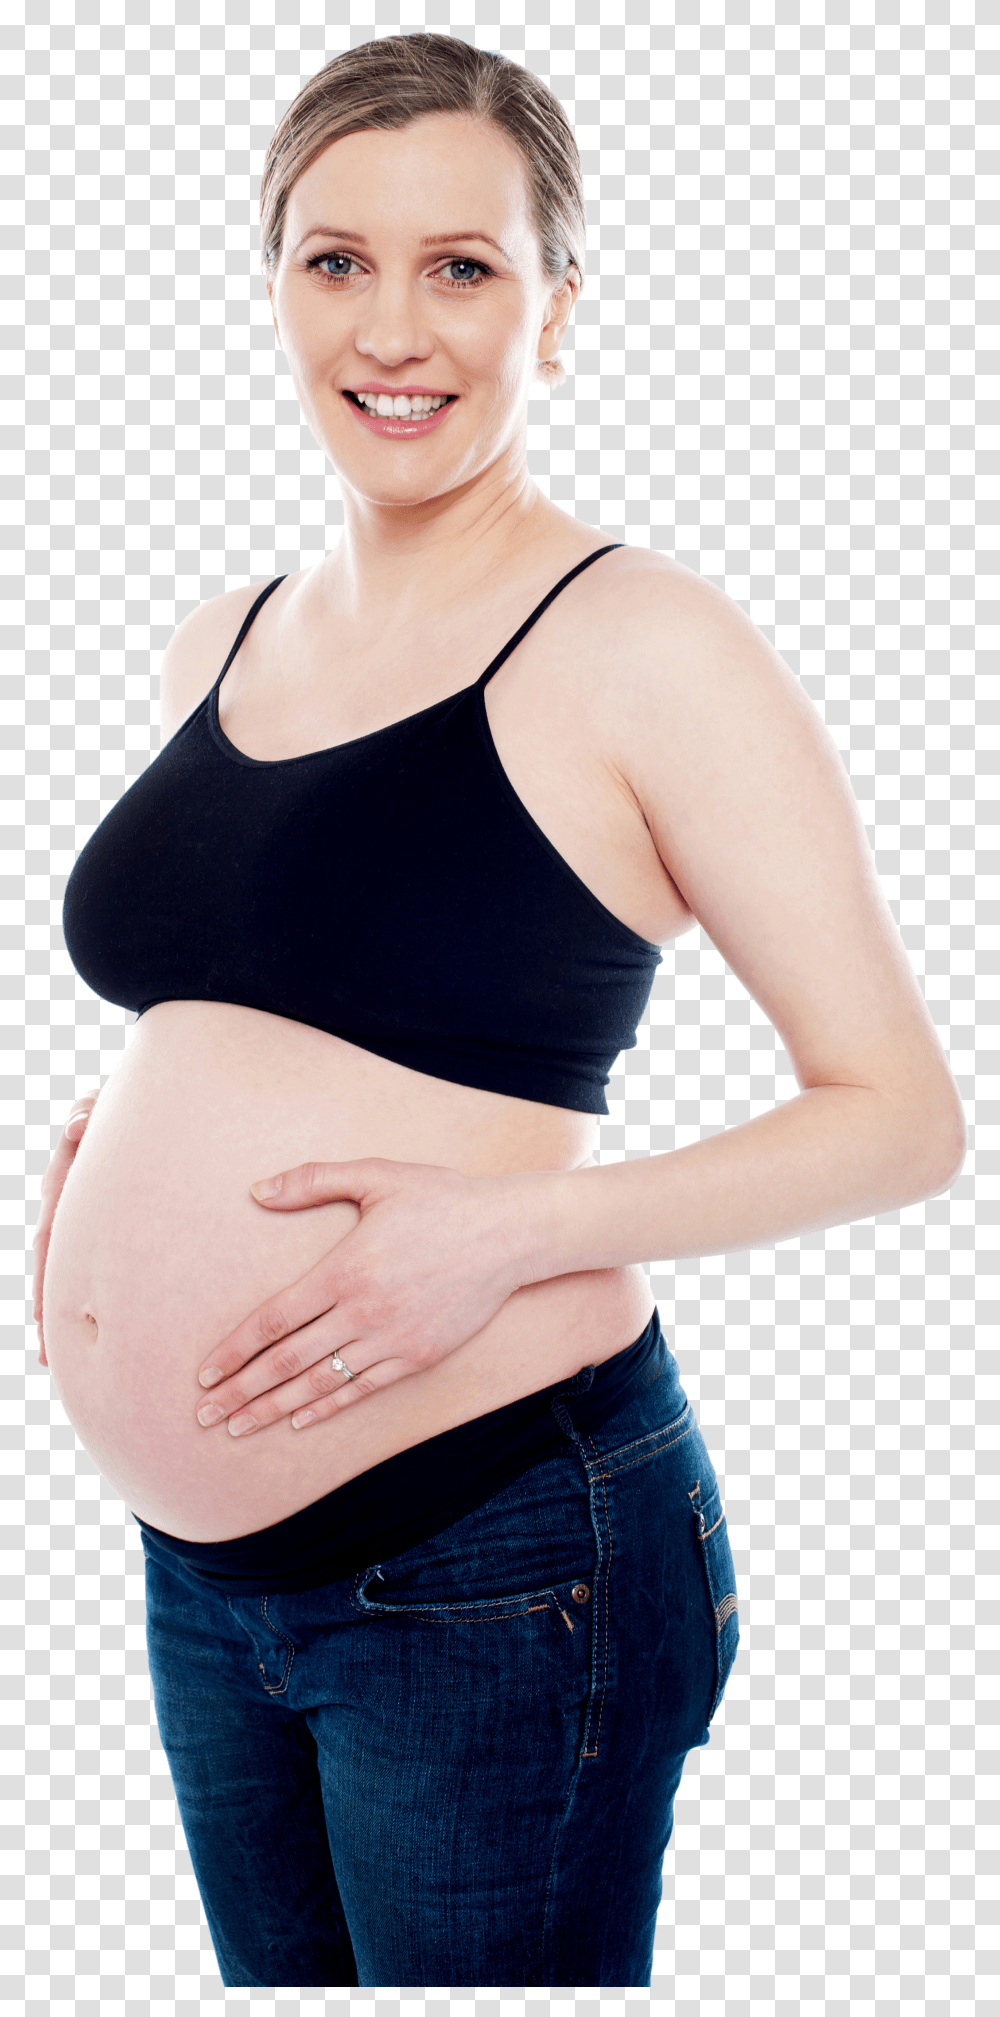 Pregnant Woman Exercise Image Big Belly Skinny Legs Woman Transparent Png